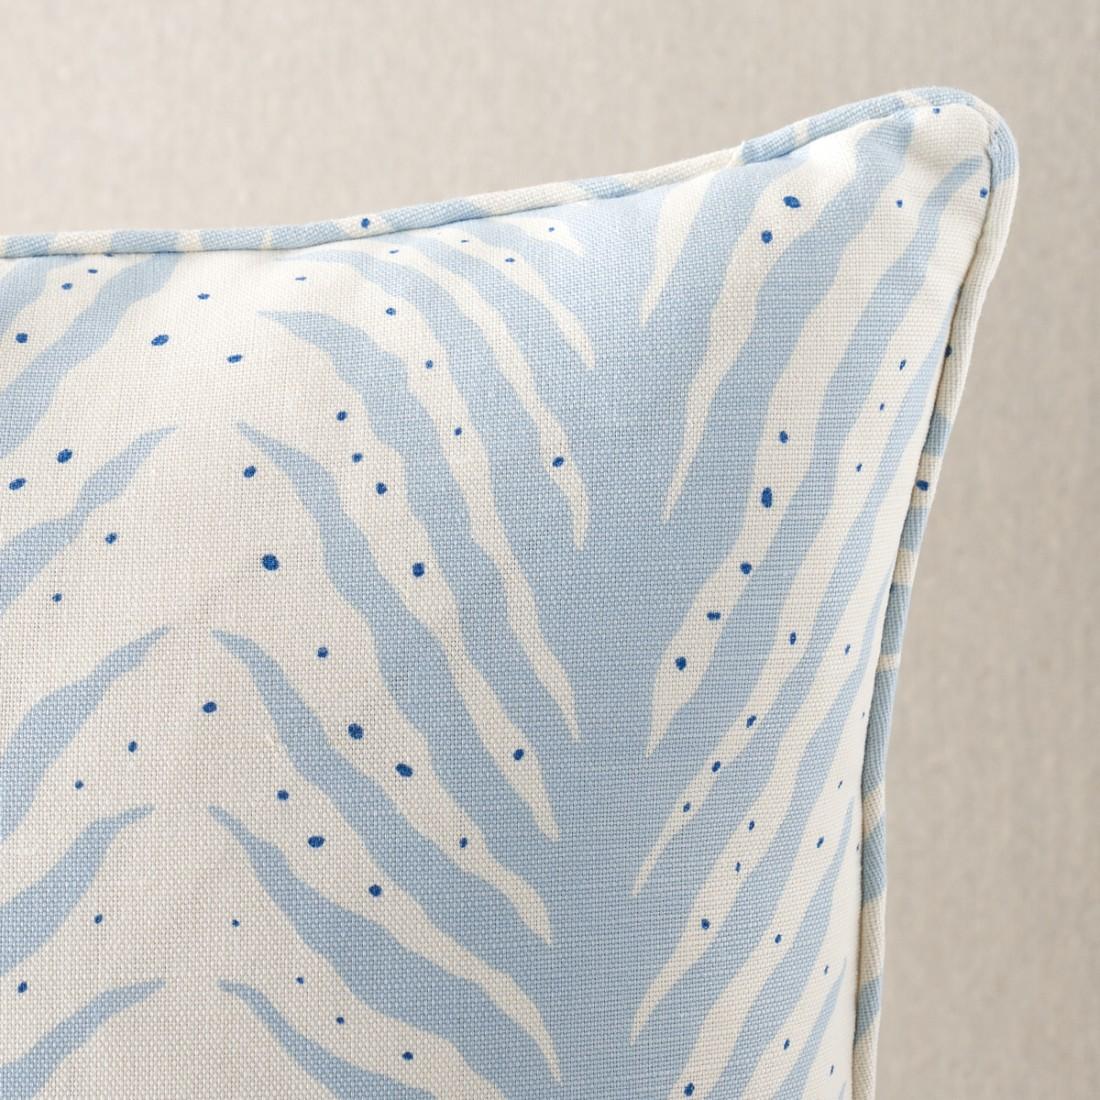 This pillow features Creeping Fern with a self-welt finish. Is it animal, vegetal or a little of both? A stripe that dares to be different, this striking printed fabric evokes feathery fern fronds and sexy animal prints. Pillow includes a